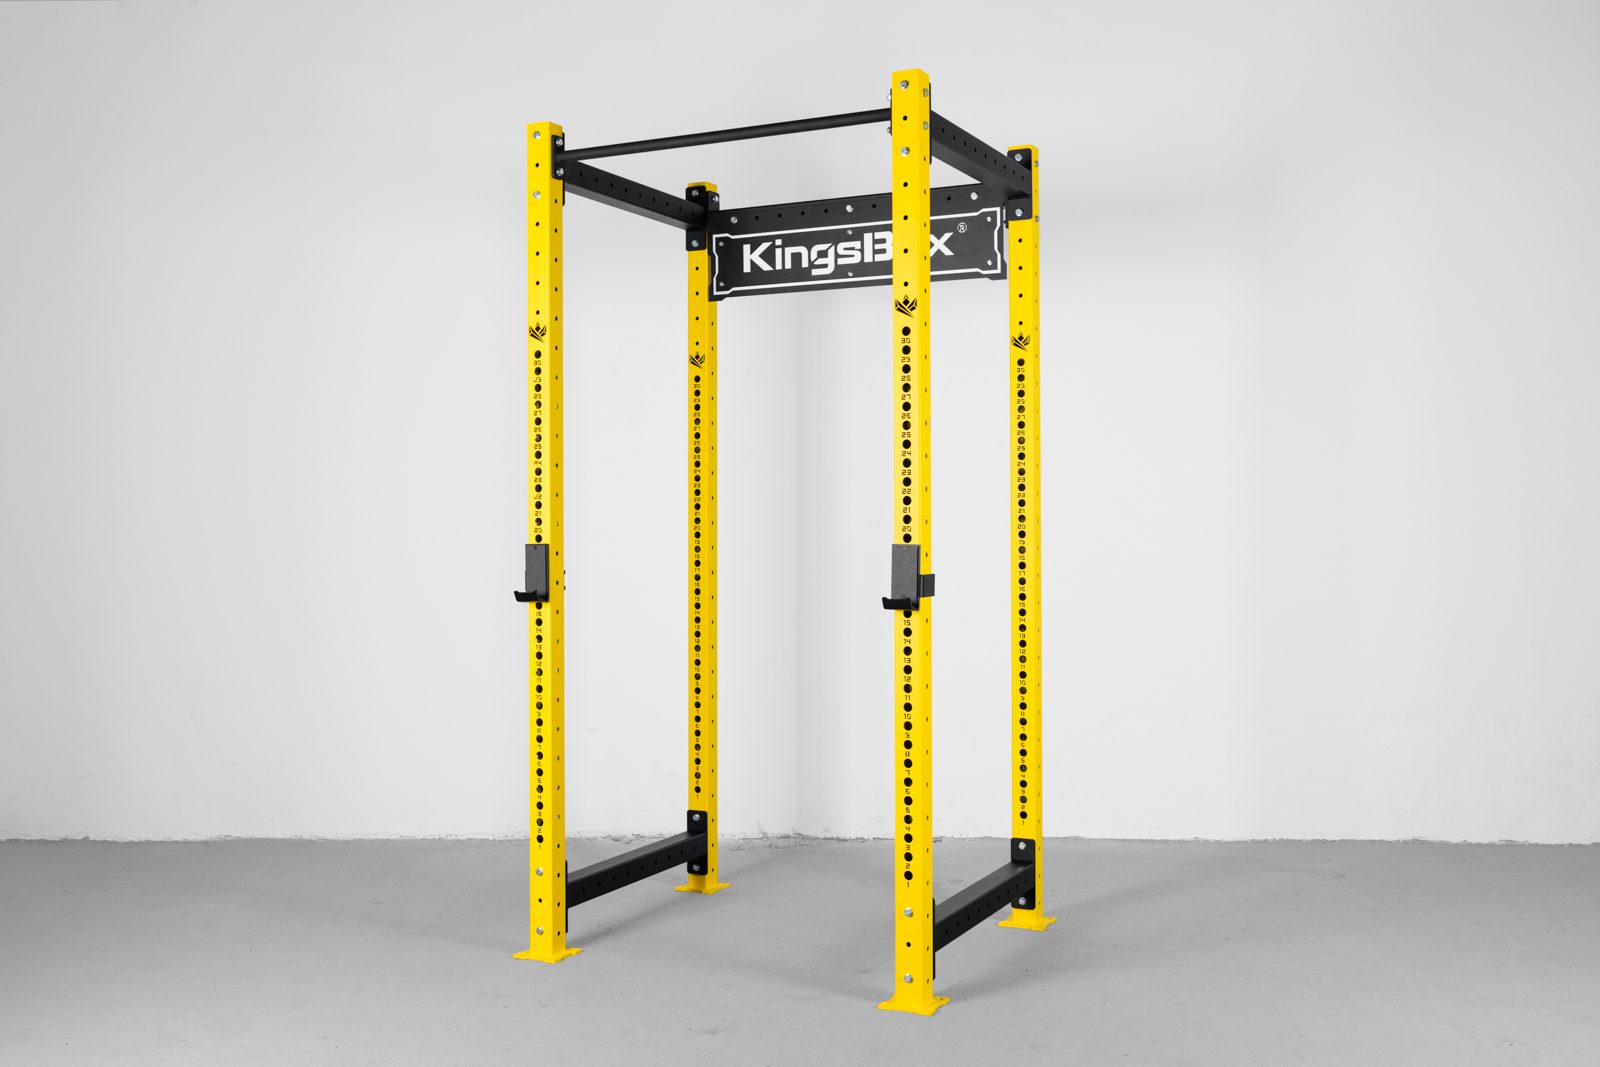 OUTLET - Mighty Power Rack CX-35 II - Yellow | KingsBox